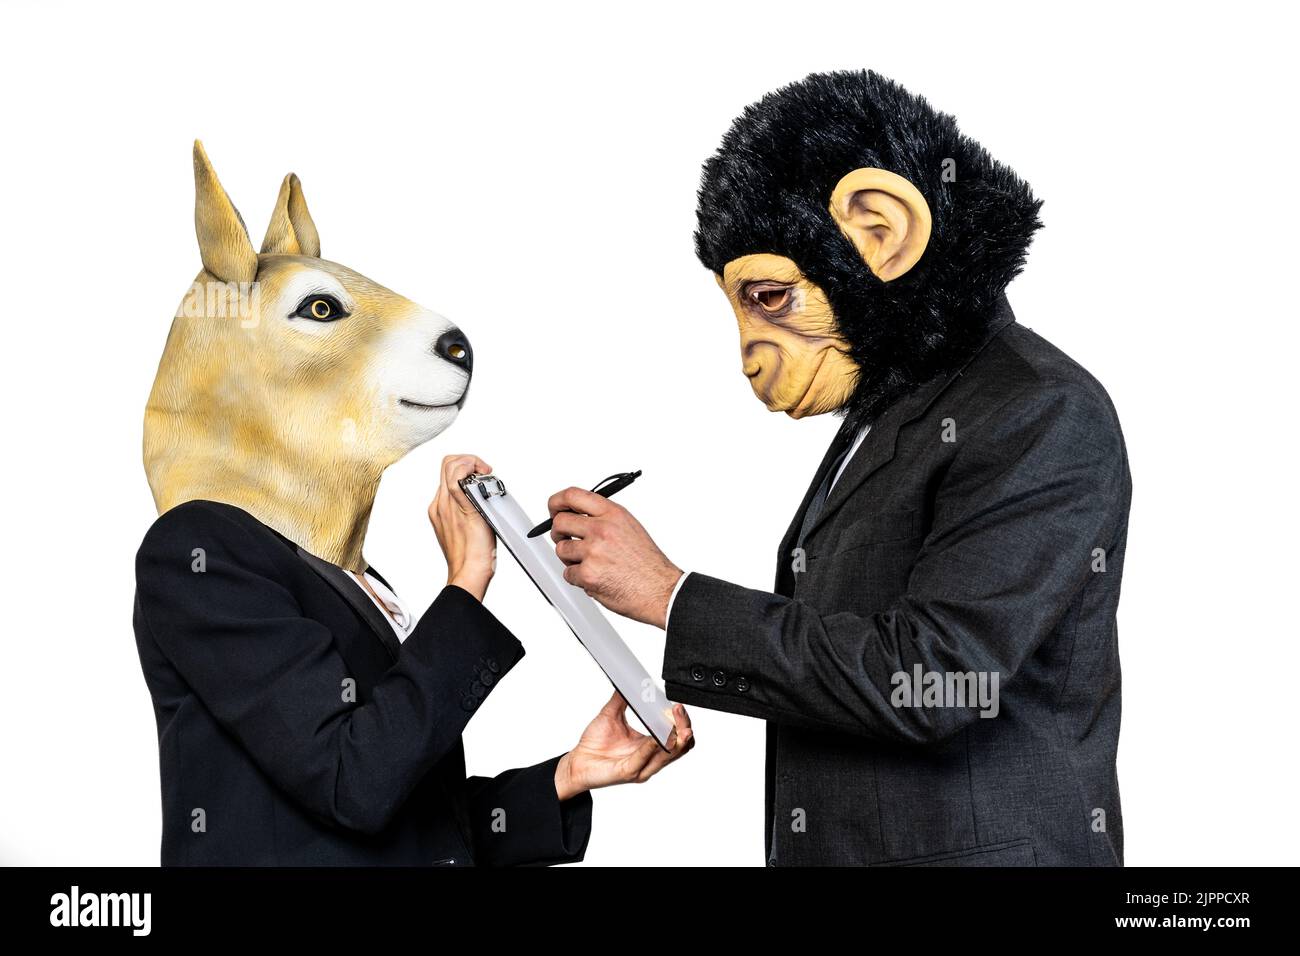 Business kangaroo woman showing a document to a business monkey man to sign it. Deal concept. Isolated white background Stock Photo